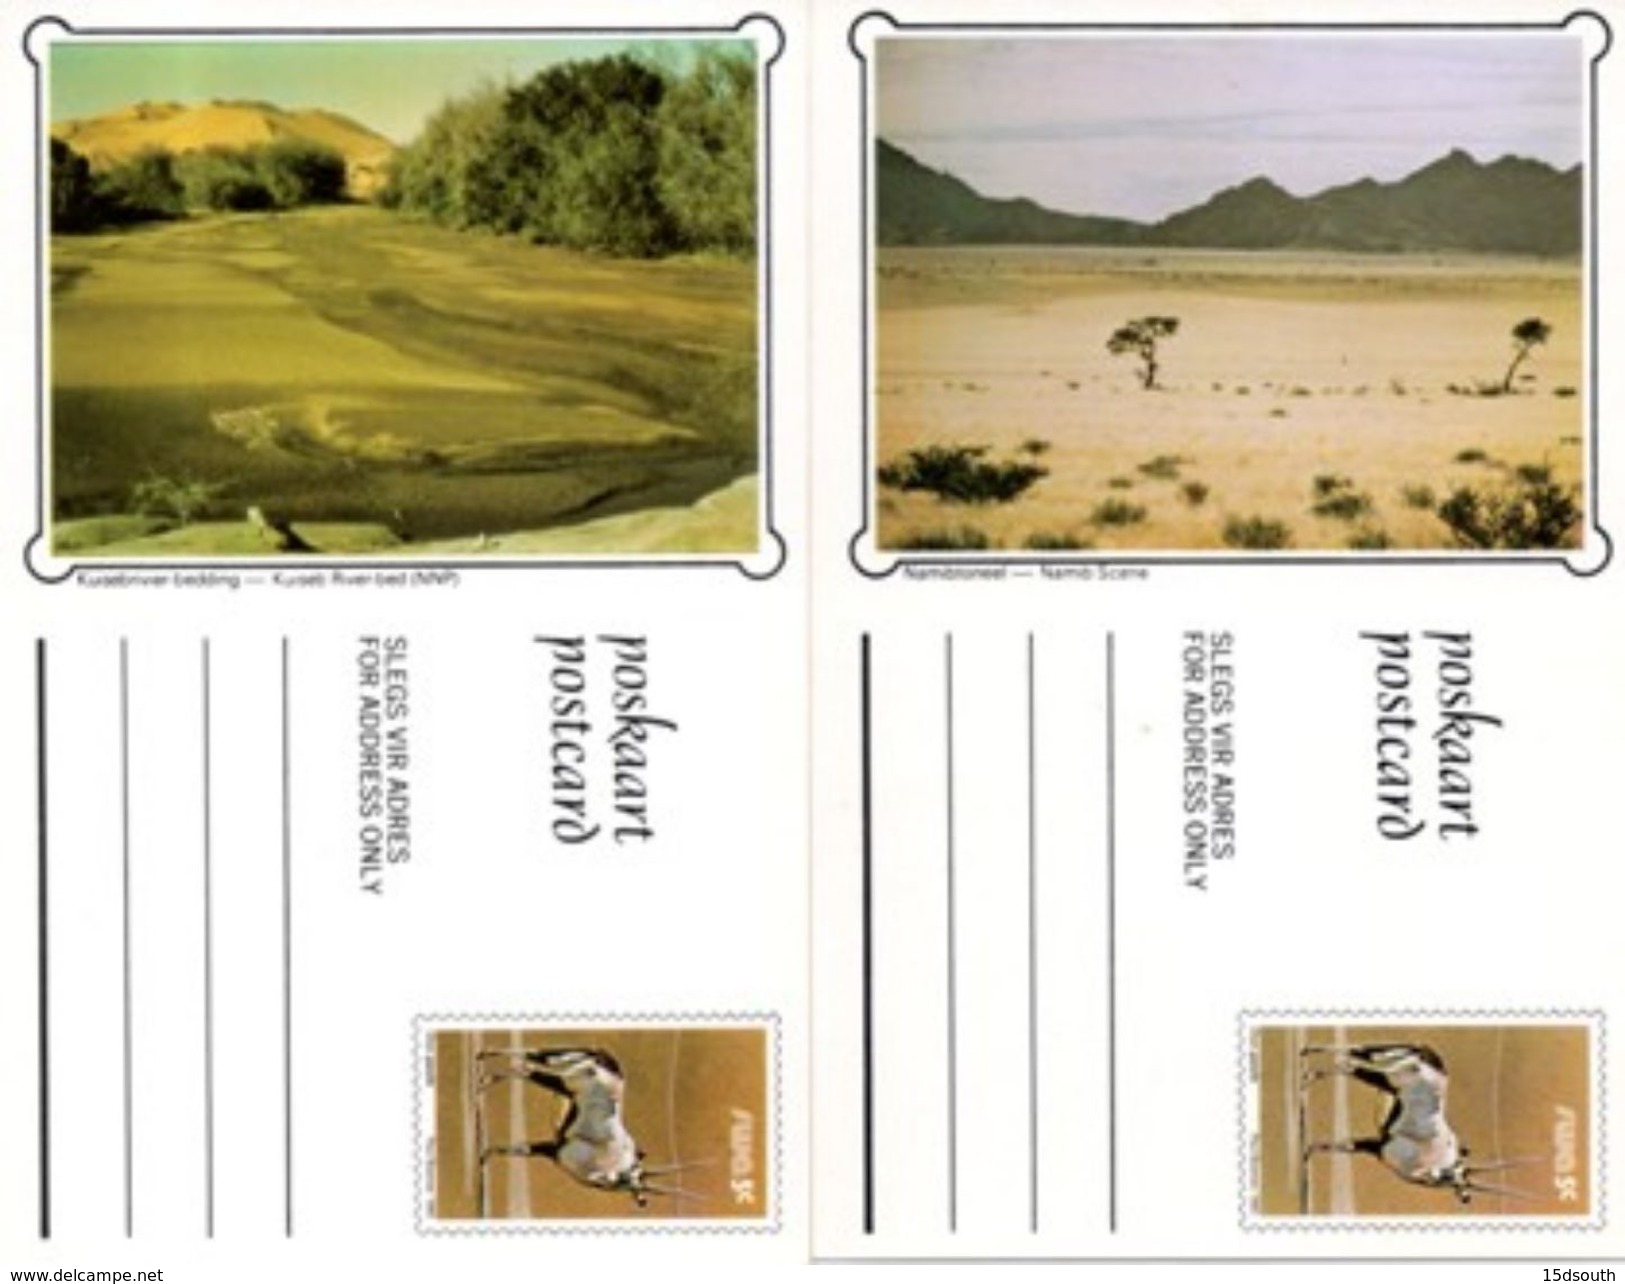 South West Africa - 1980 5c Scenery Postcard Set Mint - Namibia